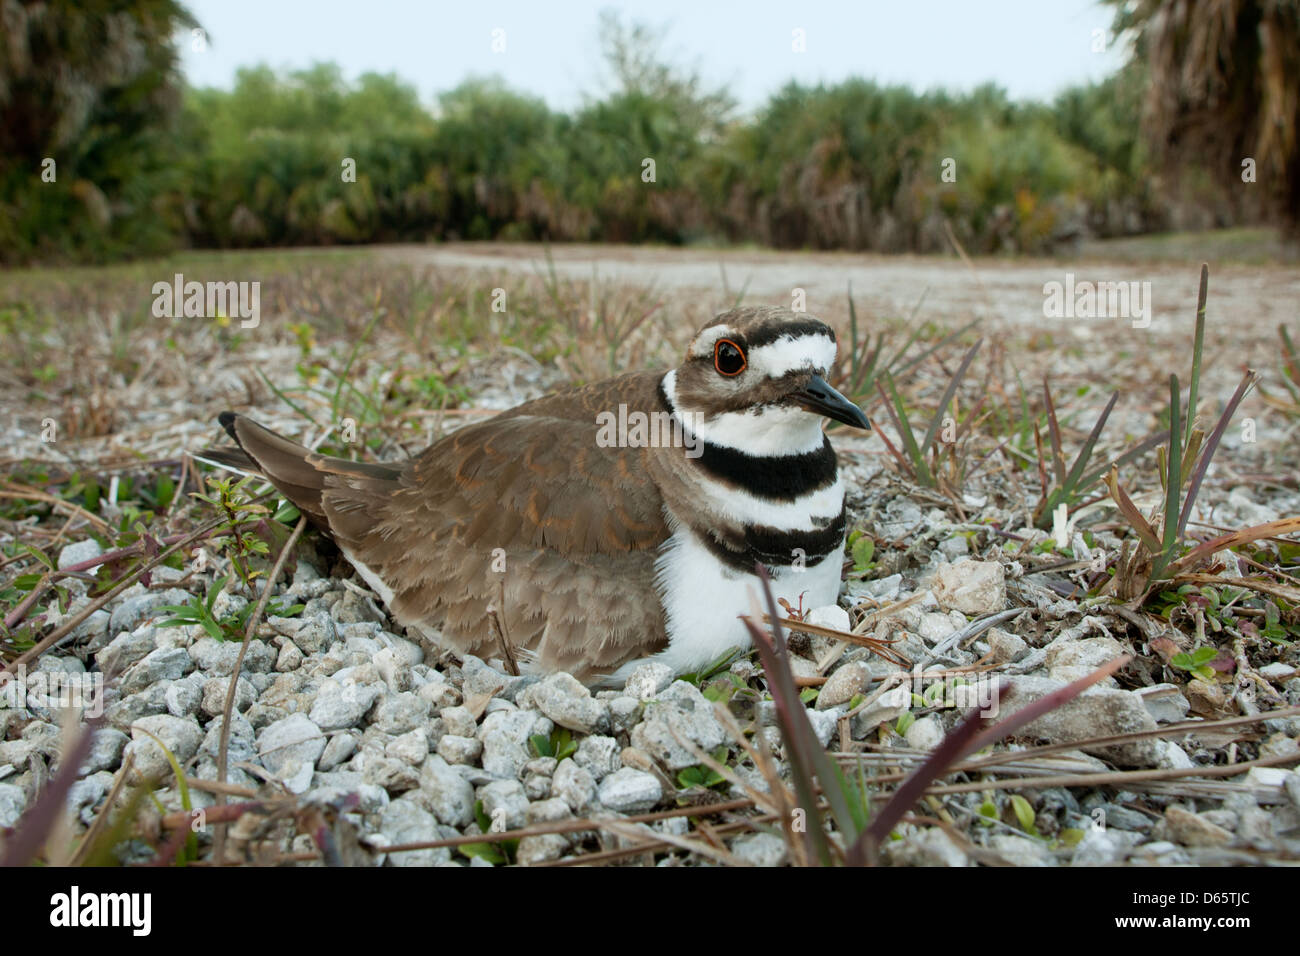 Wide angle view of Killdeer on its nest nests bird birds songbird songbirds plover plovers nature wildlife environment Stock Photo